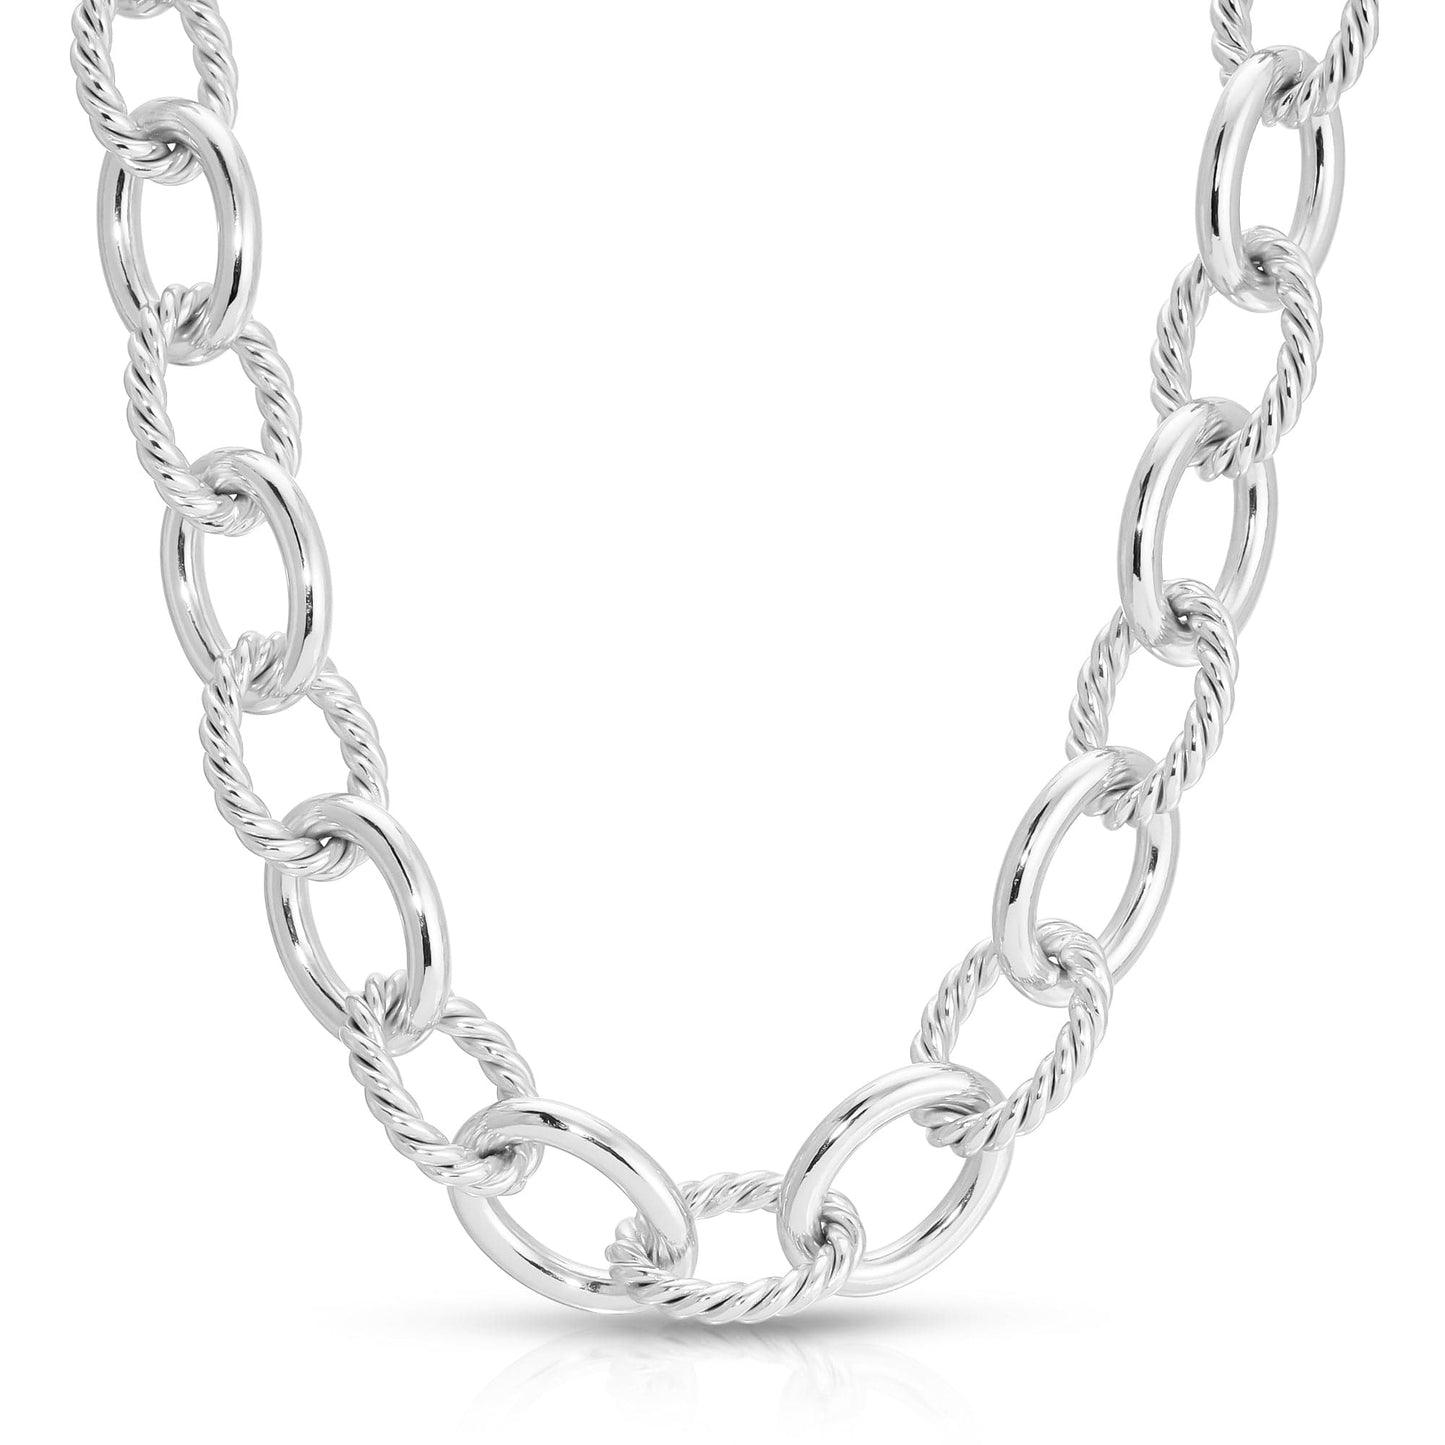 xl alternating twisted link toggle necklace by eklexic